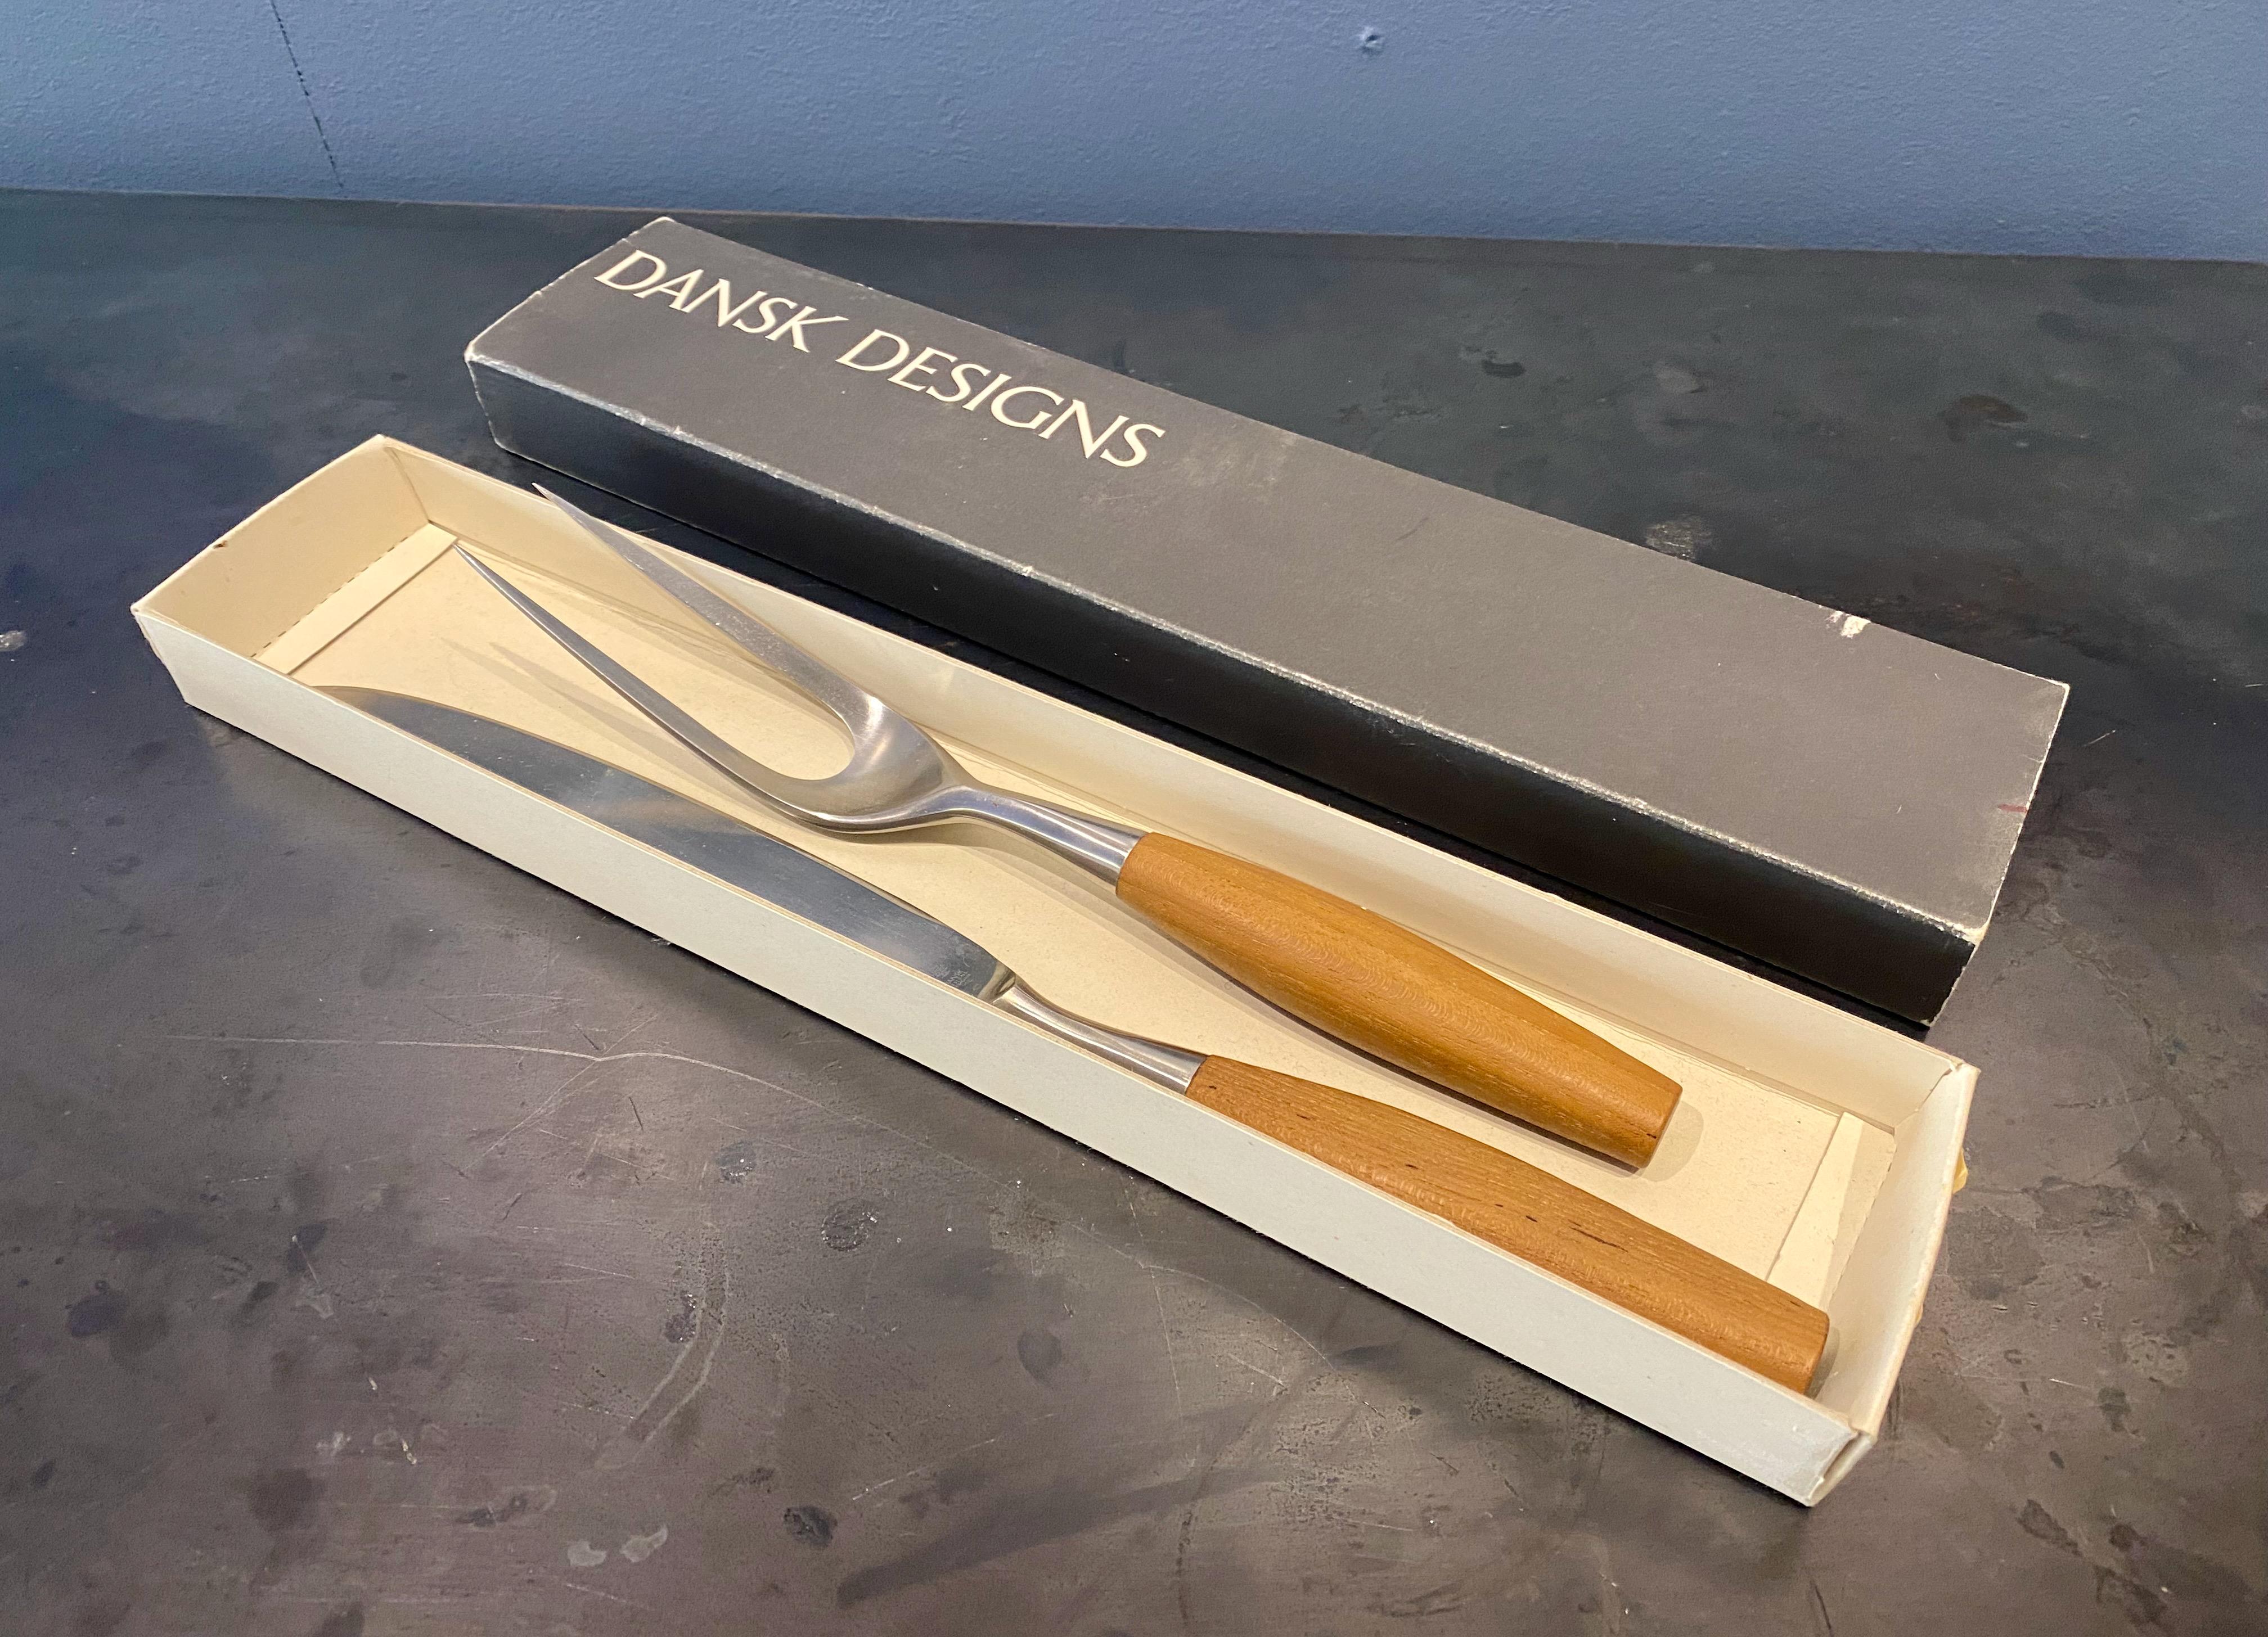 The Fjord flatware was designed in 1953 and produced in co operation with an American businessman under the label Dansk design. The flatware was originally manufactured in Germany. Stainless steel and teak. A modern design icon which found its way